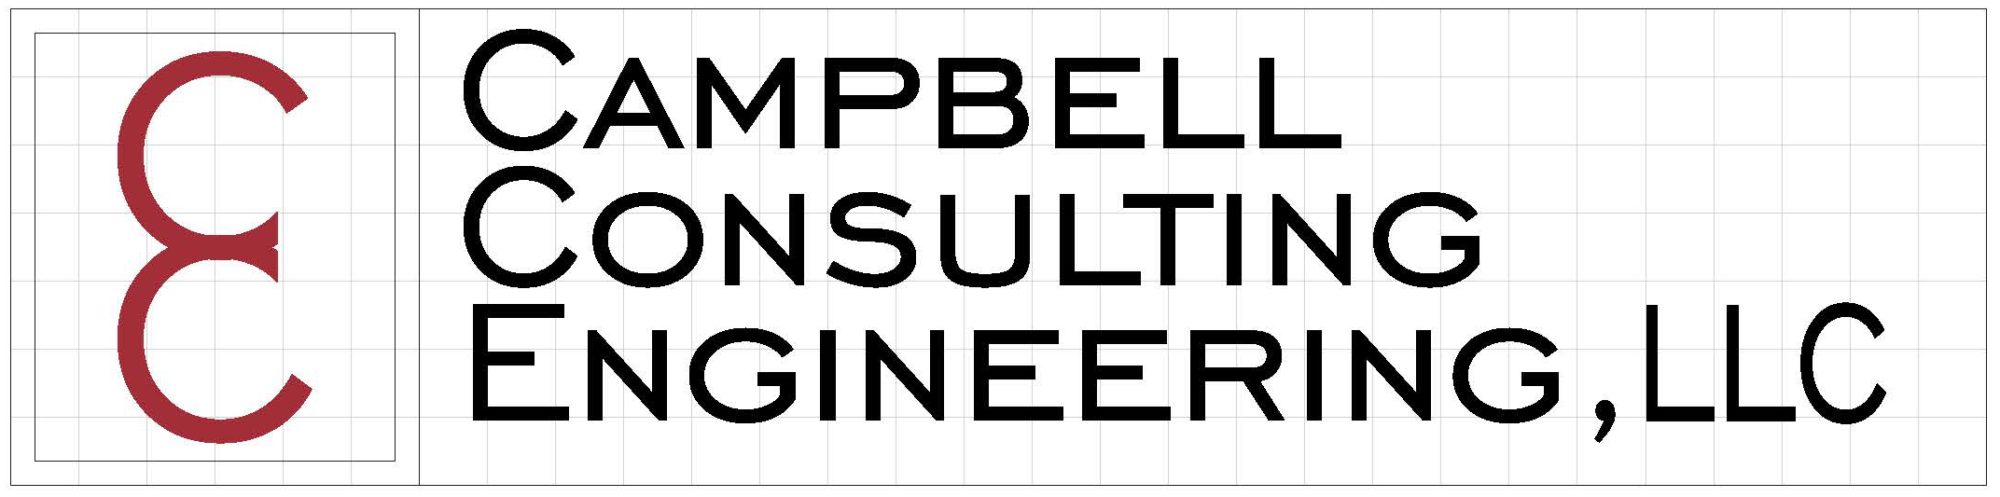 Campbell Consulting Engineering, LLC